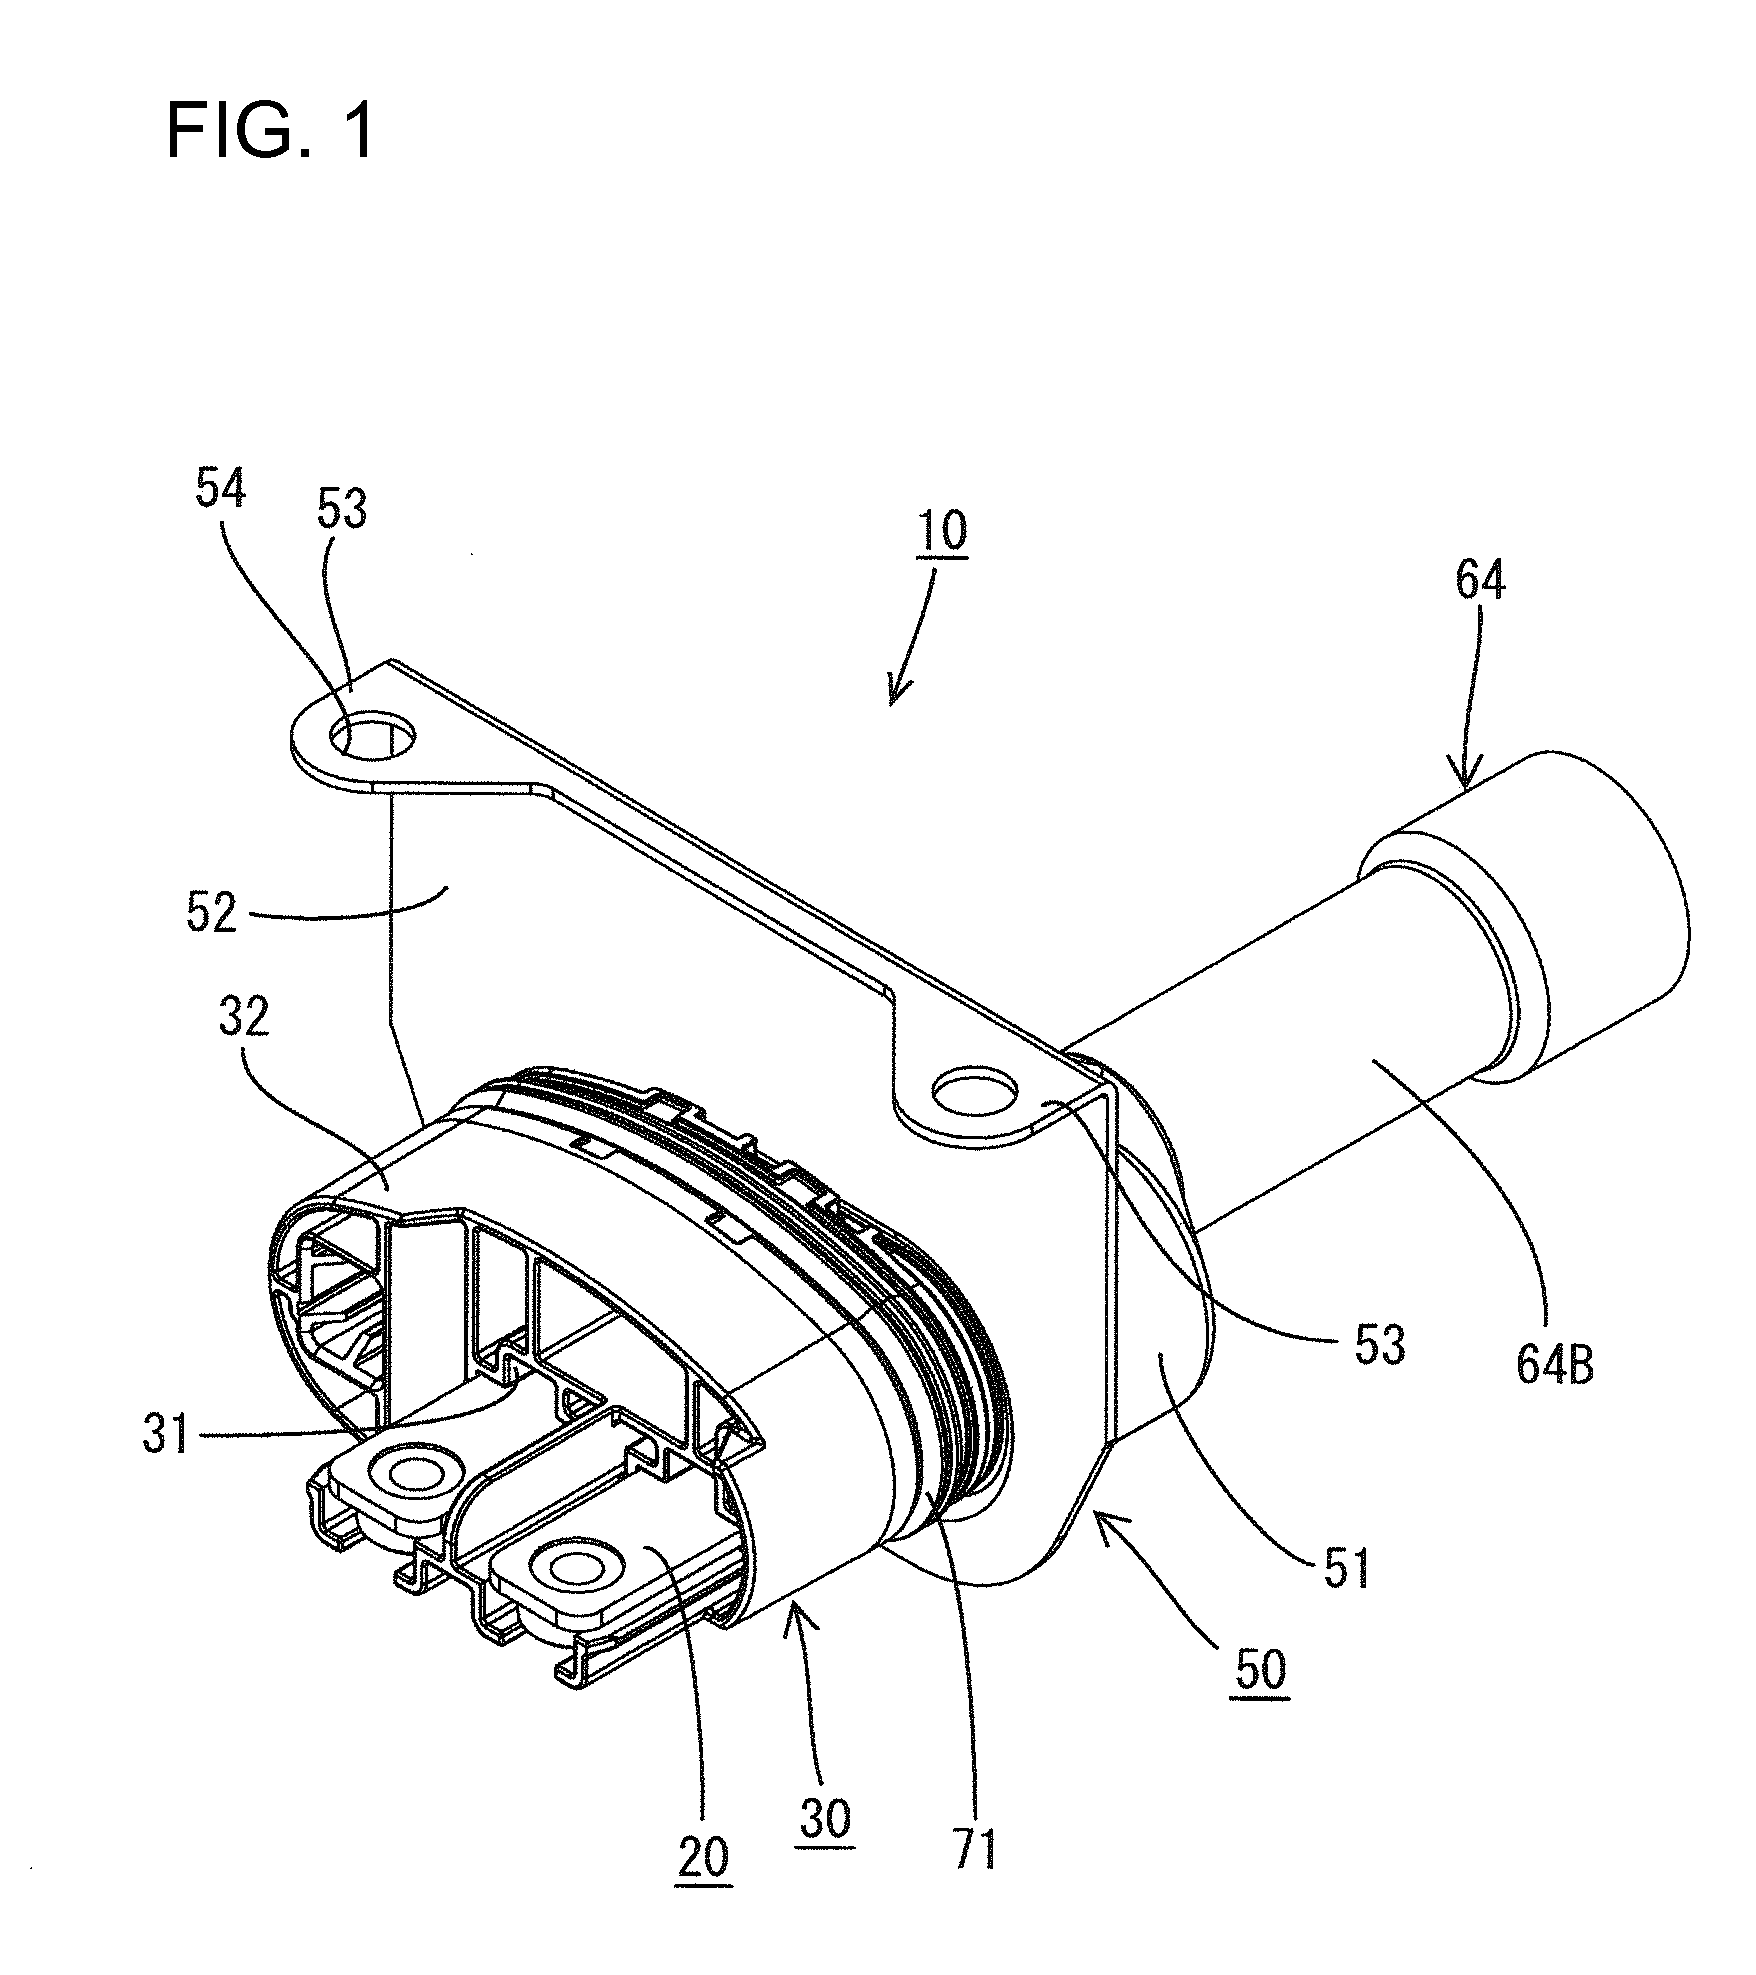 Shield connector having a shield shell connected to a metallic case and a shield conductor